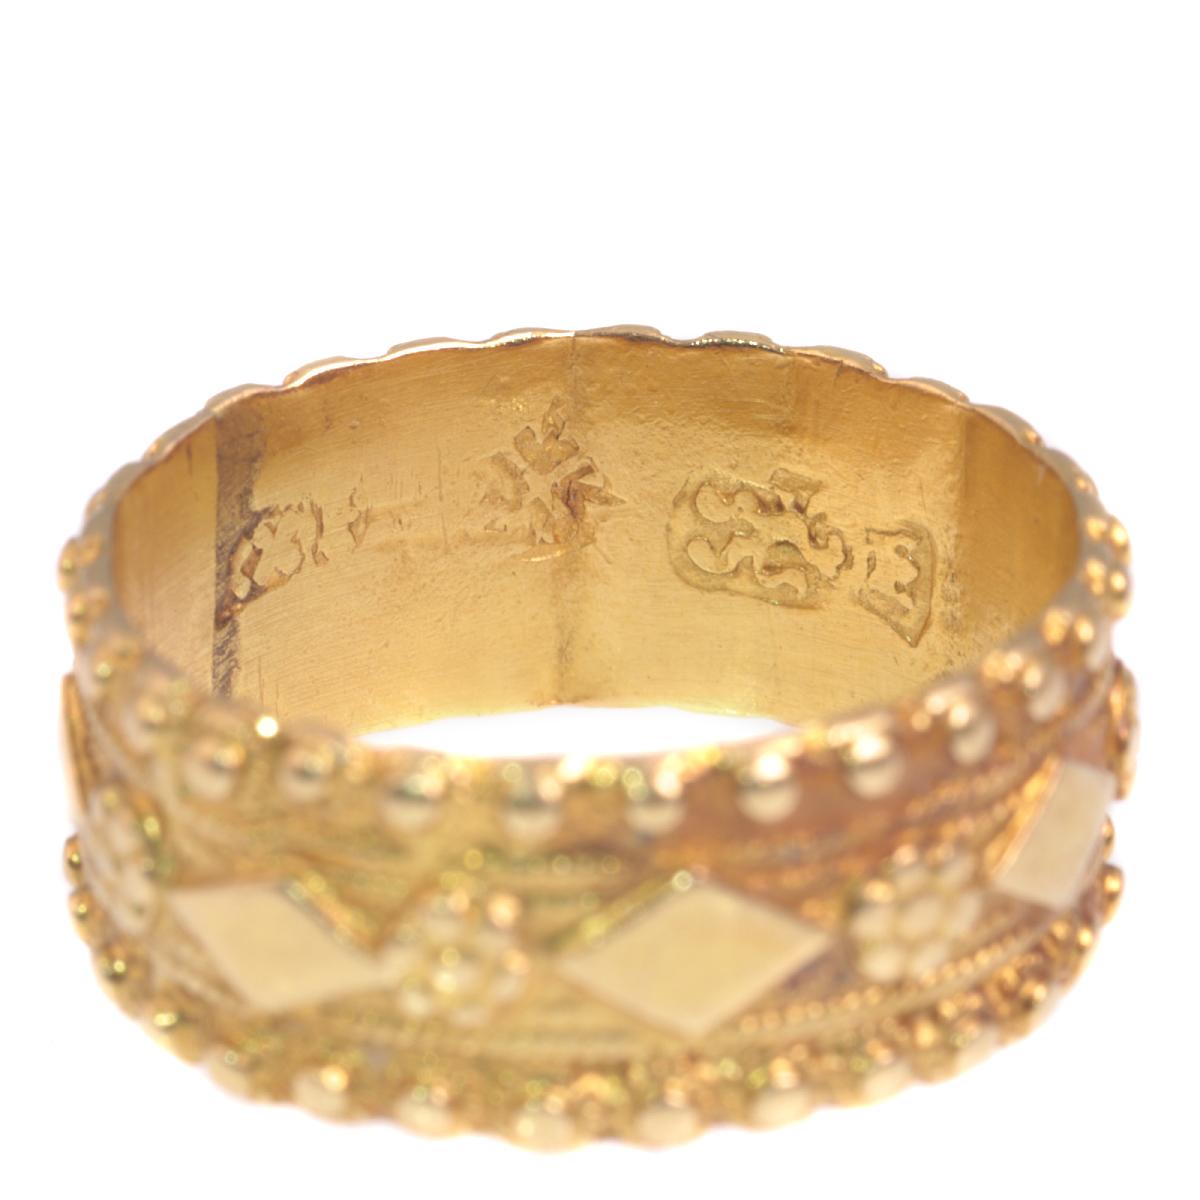 Late 18th Century Rococo Dutch Gold Ring with Amsterdam Hallmarks, 1780s For Sale 4